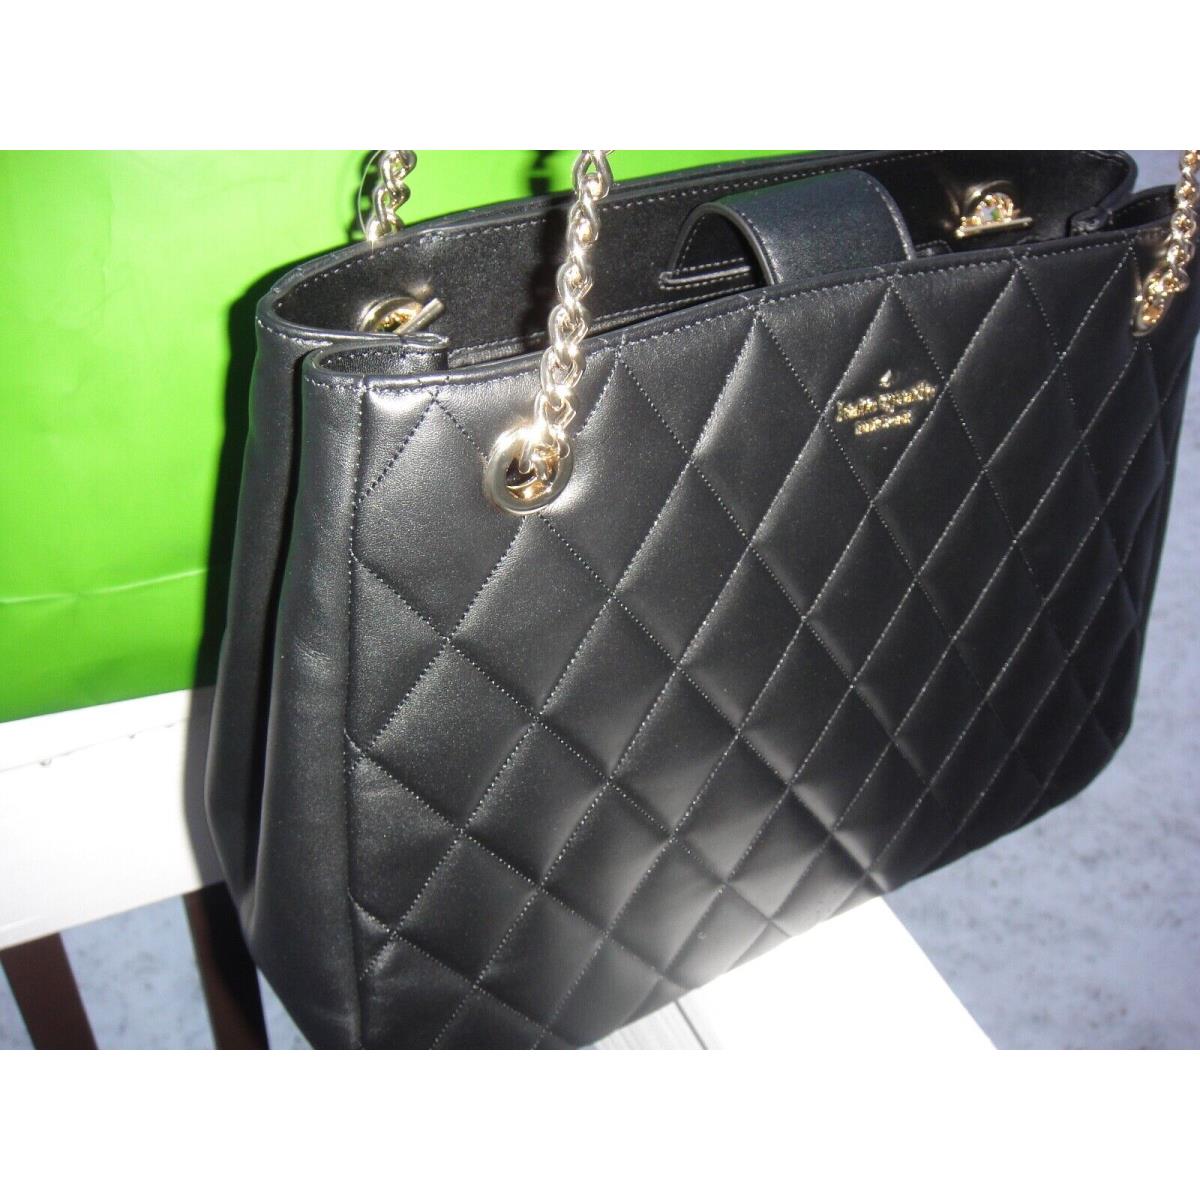 New With Tag Kate Spade Carey Large Quilted Black Tote Bag$549.00.100%  Authentic 